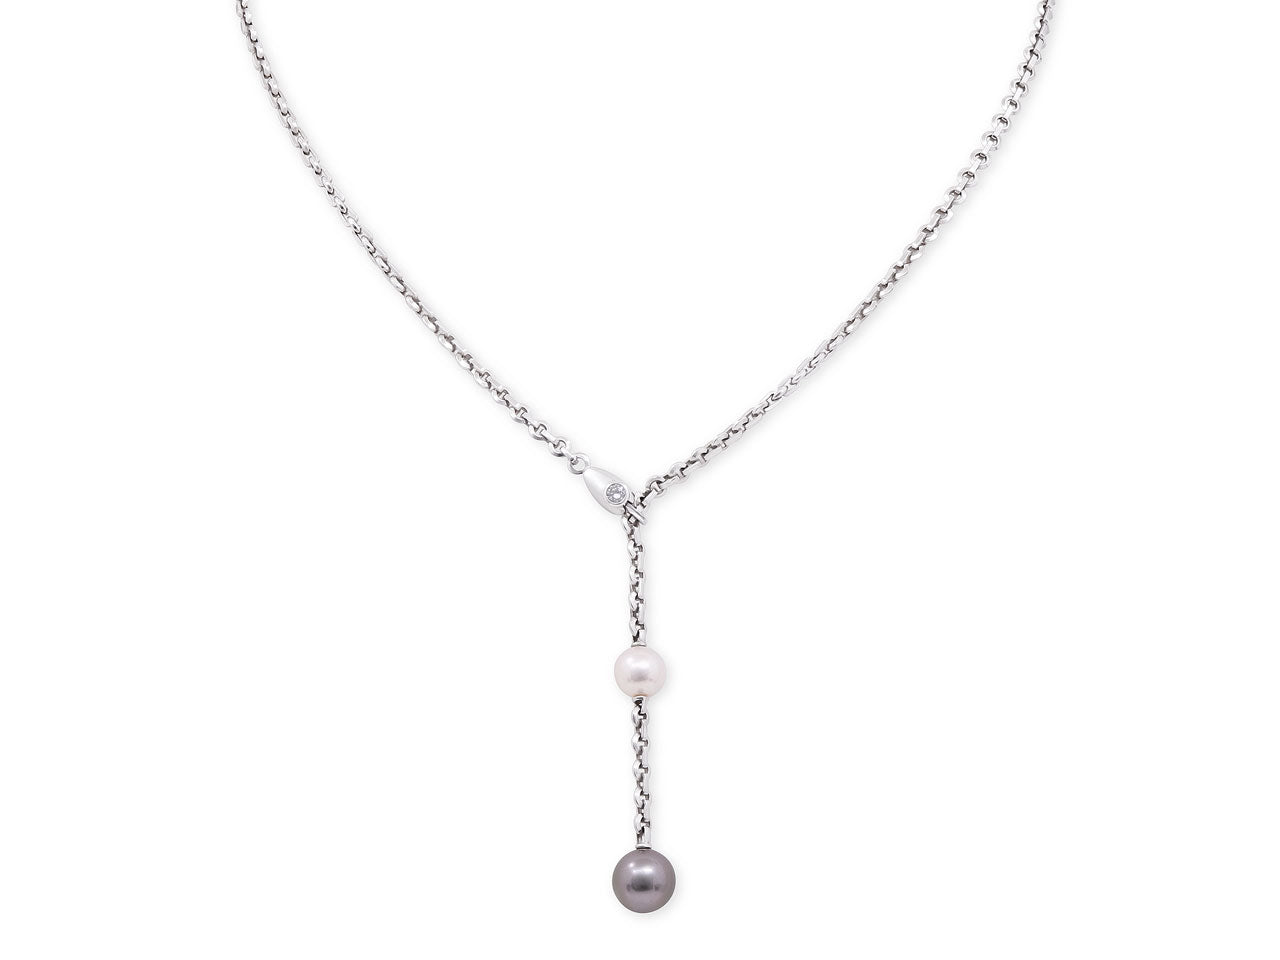 Cartier South Sea and Tahitian Pearl Lariat Necklace in 18K White Gold